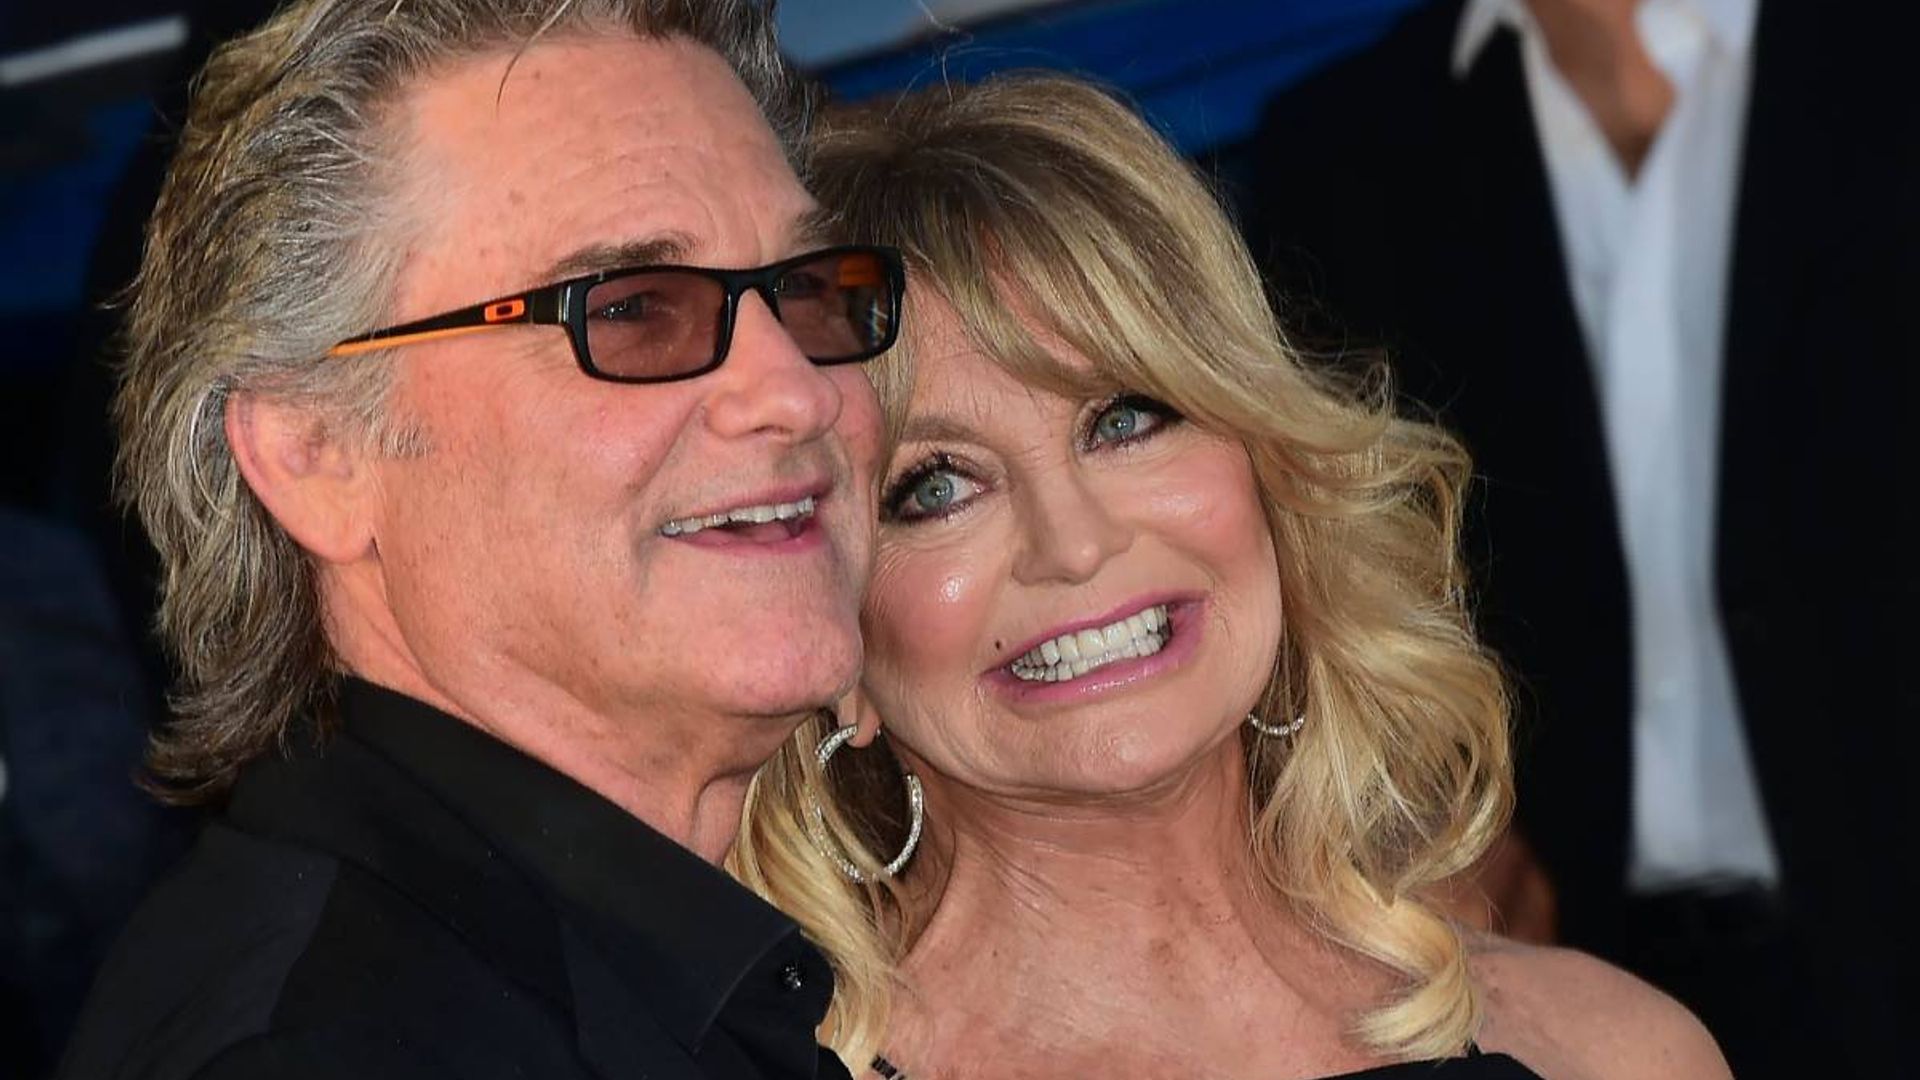 Goldie Hawn stuns in leather and wild hair with Kurt Russell in nostalgic date photo